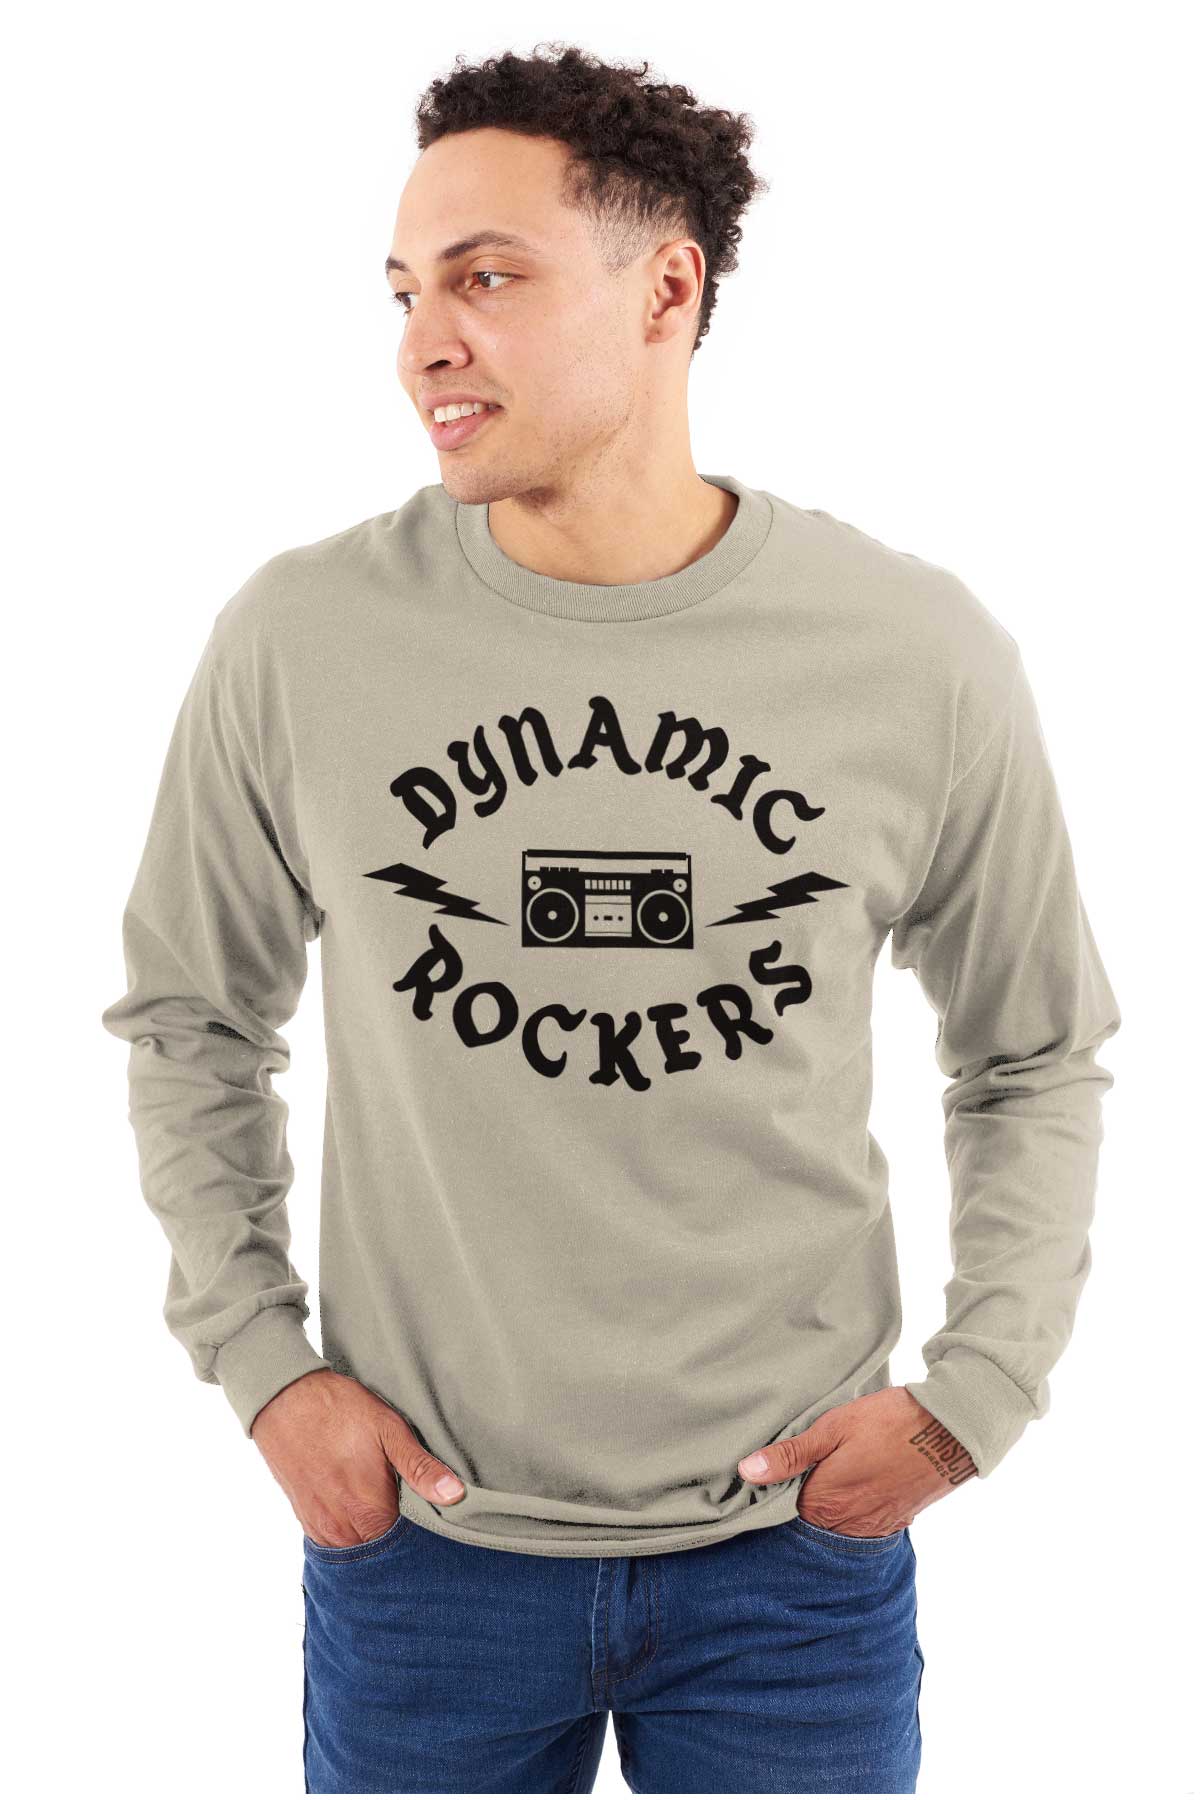 This sweatshirt captures the electric and intense energy of the Rockers crew with their logo. Embrace the dynamic spirit and powerful presence they bring. It's more than just clothing; it represents the vibe, feel, and raw energy of hip-hop culture.